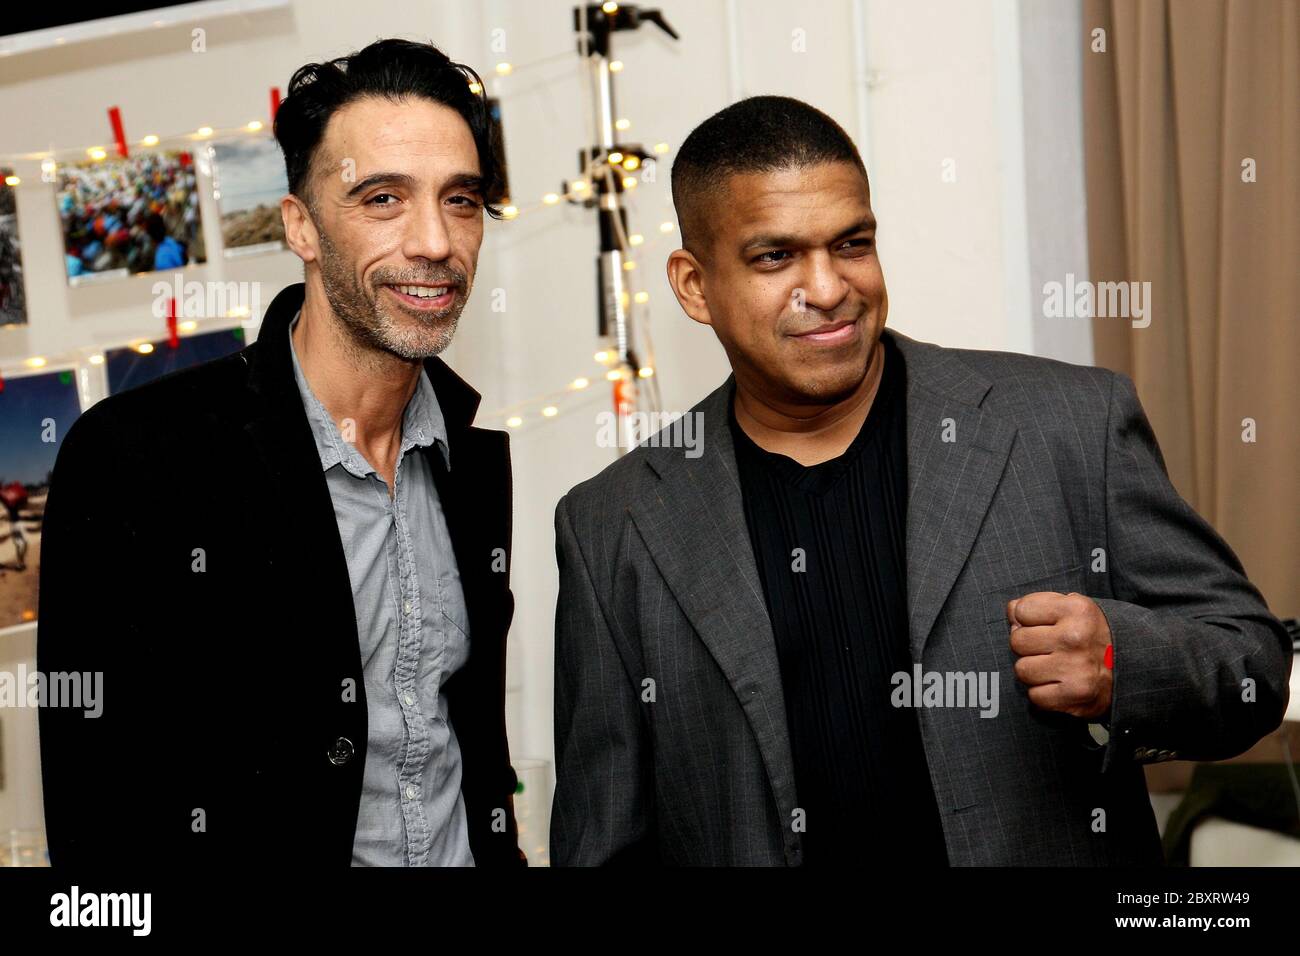 New York, NY, USA. 2 February, 2017. Carlos Leon, Maurepaz Auguste at the RE-Touch Haiti Charity To benefit The Artists Institute/Artists for Peace & Justice at Splashlight Studios. Credit: Steve Mack/Alamy Stock Photo